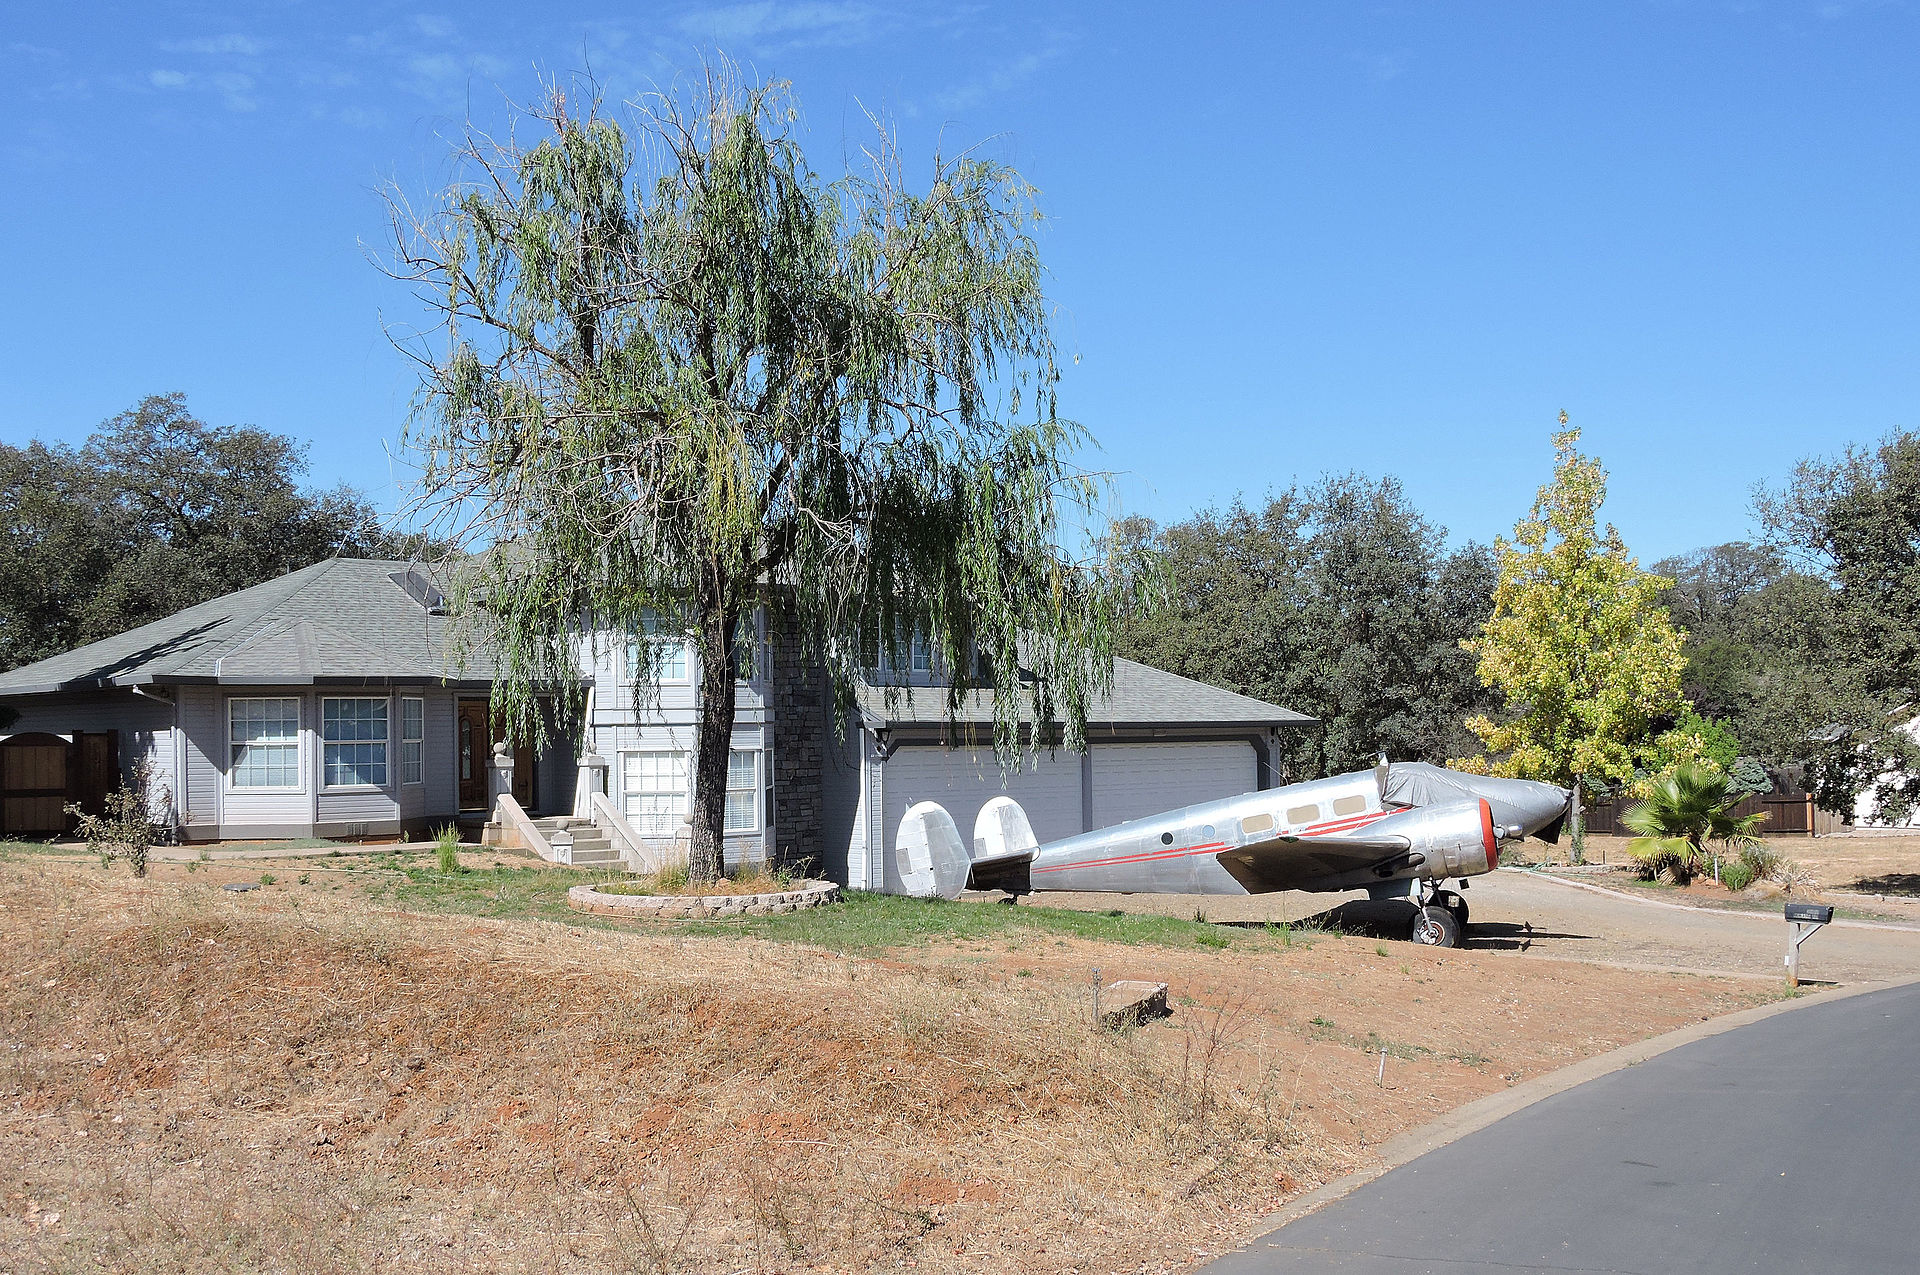 1920px-Cameron_Airpark_plane_in_driveway2.jpg